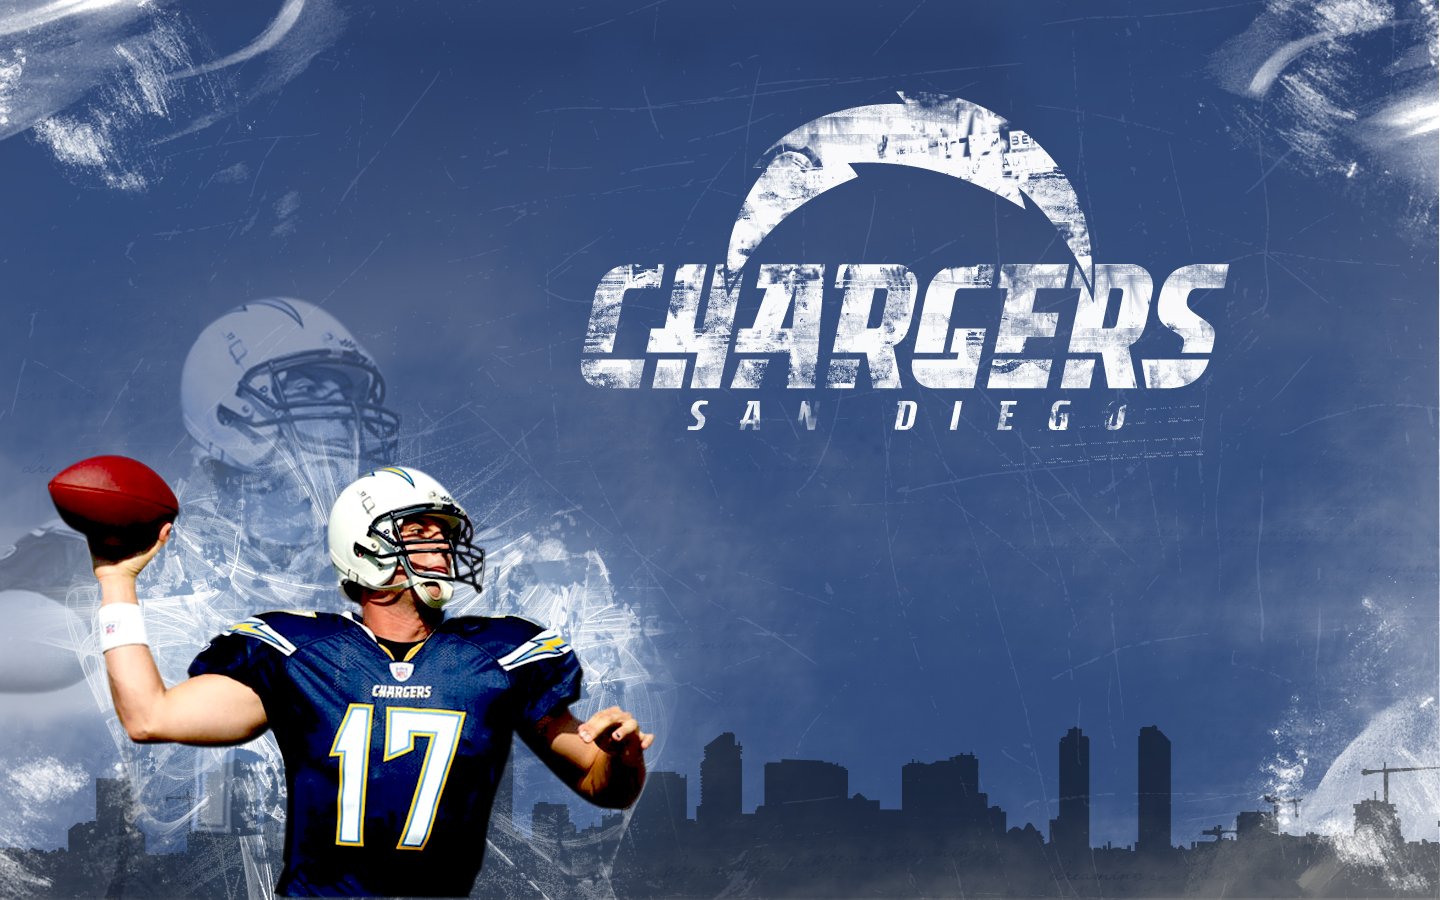  san diego chargers wallpaper oesn1 07 17 2011 san diego chargers